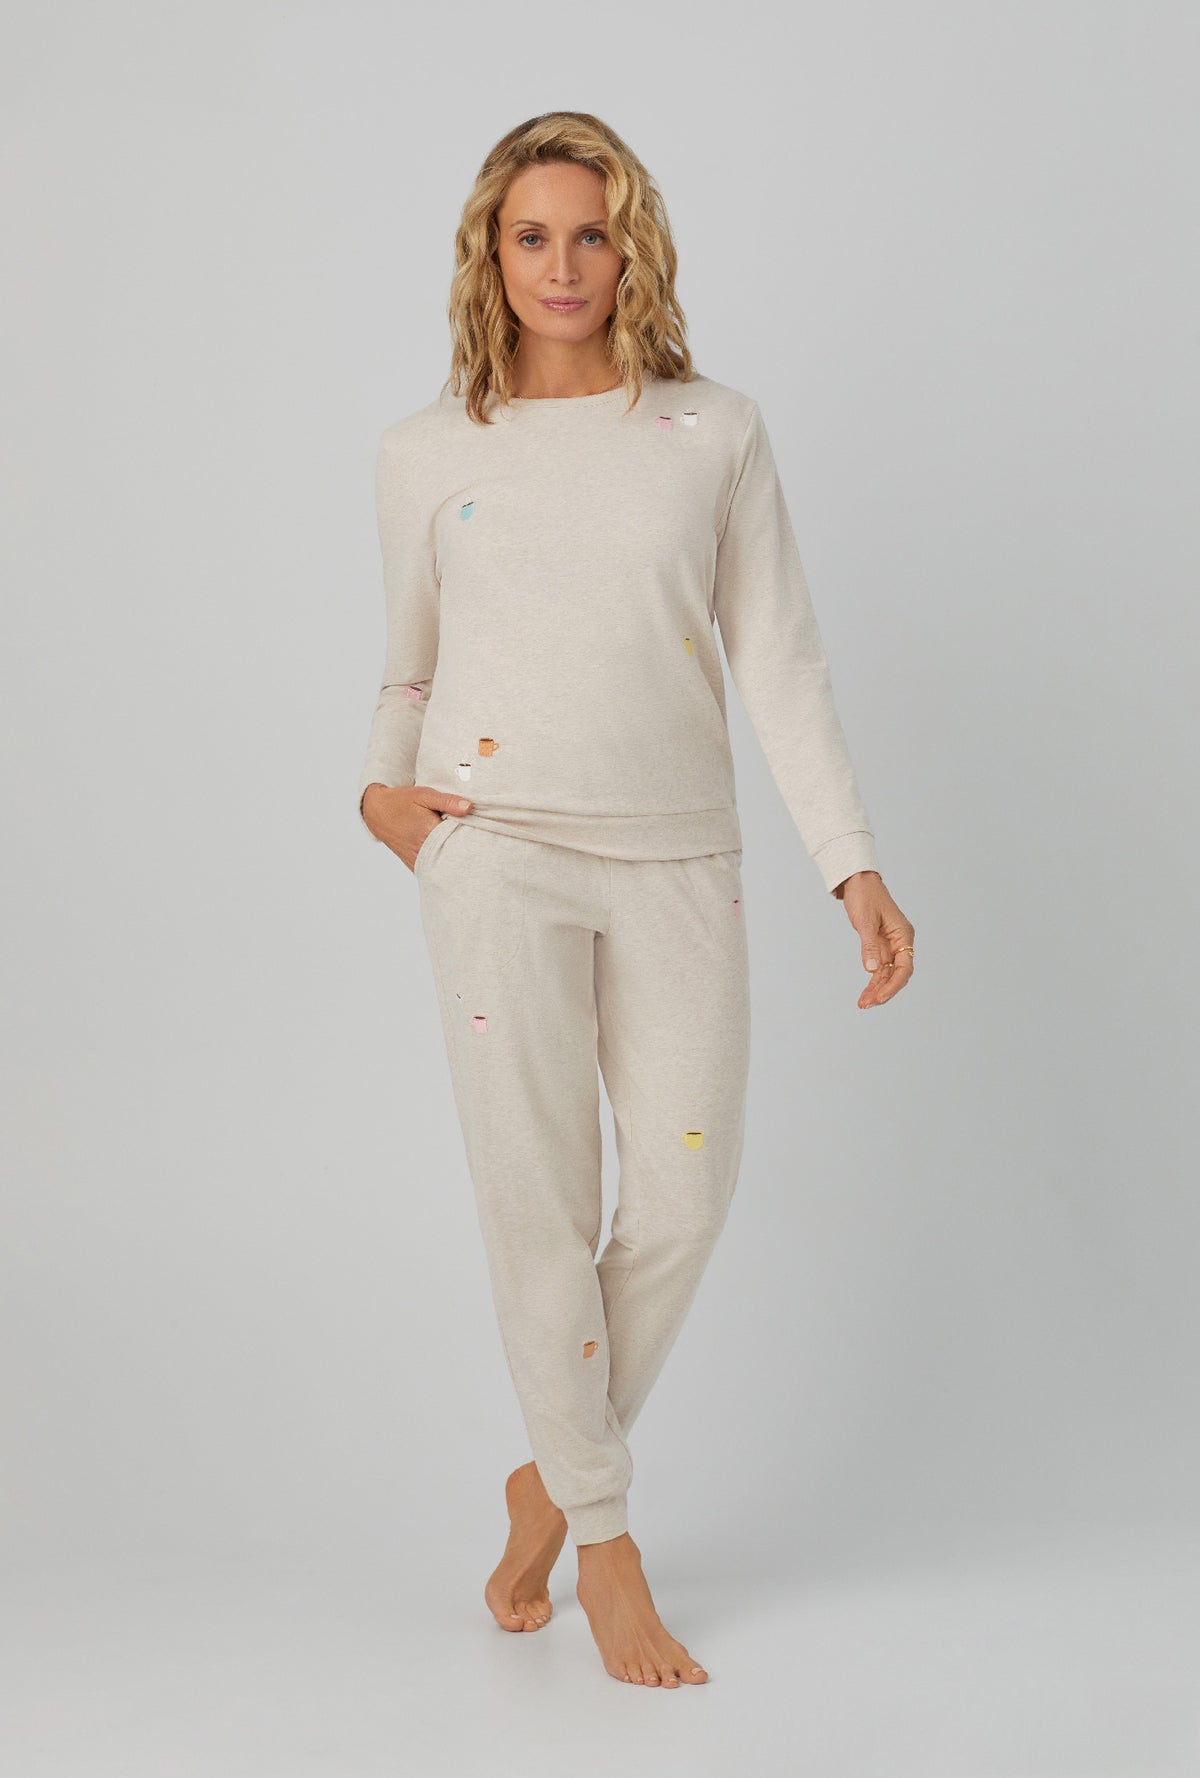 A lady wearing Long Sleeve Pullover Crew and Jogger Stretch Jersey PJ Set with latte heather print